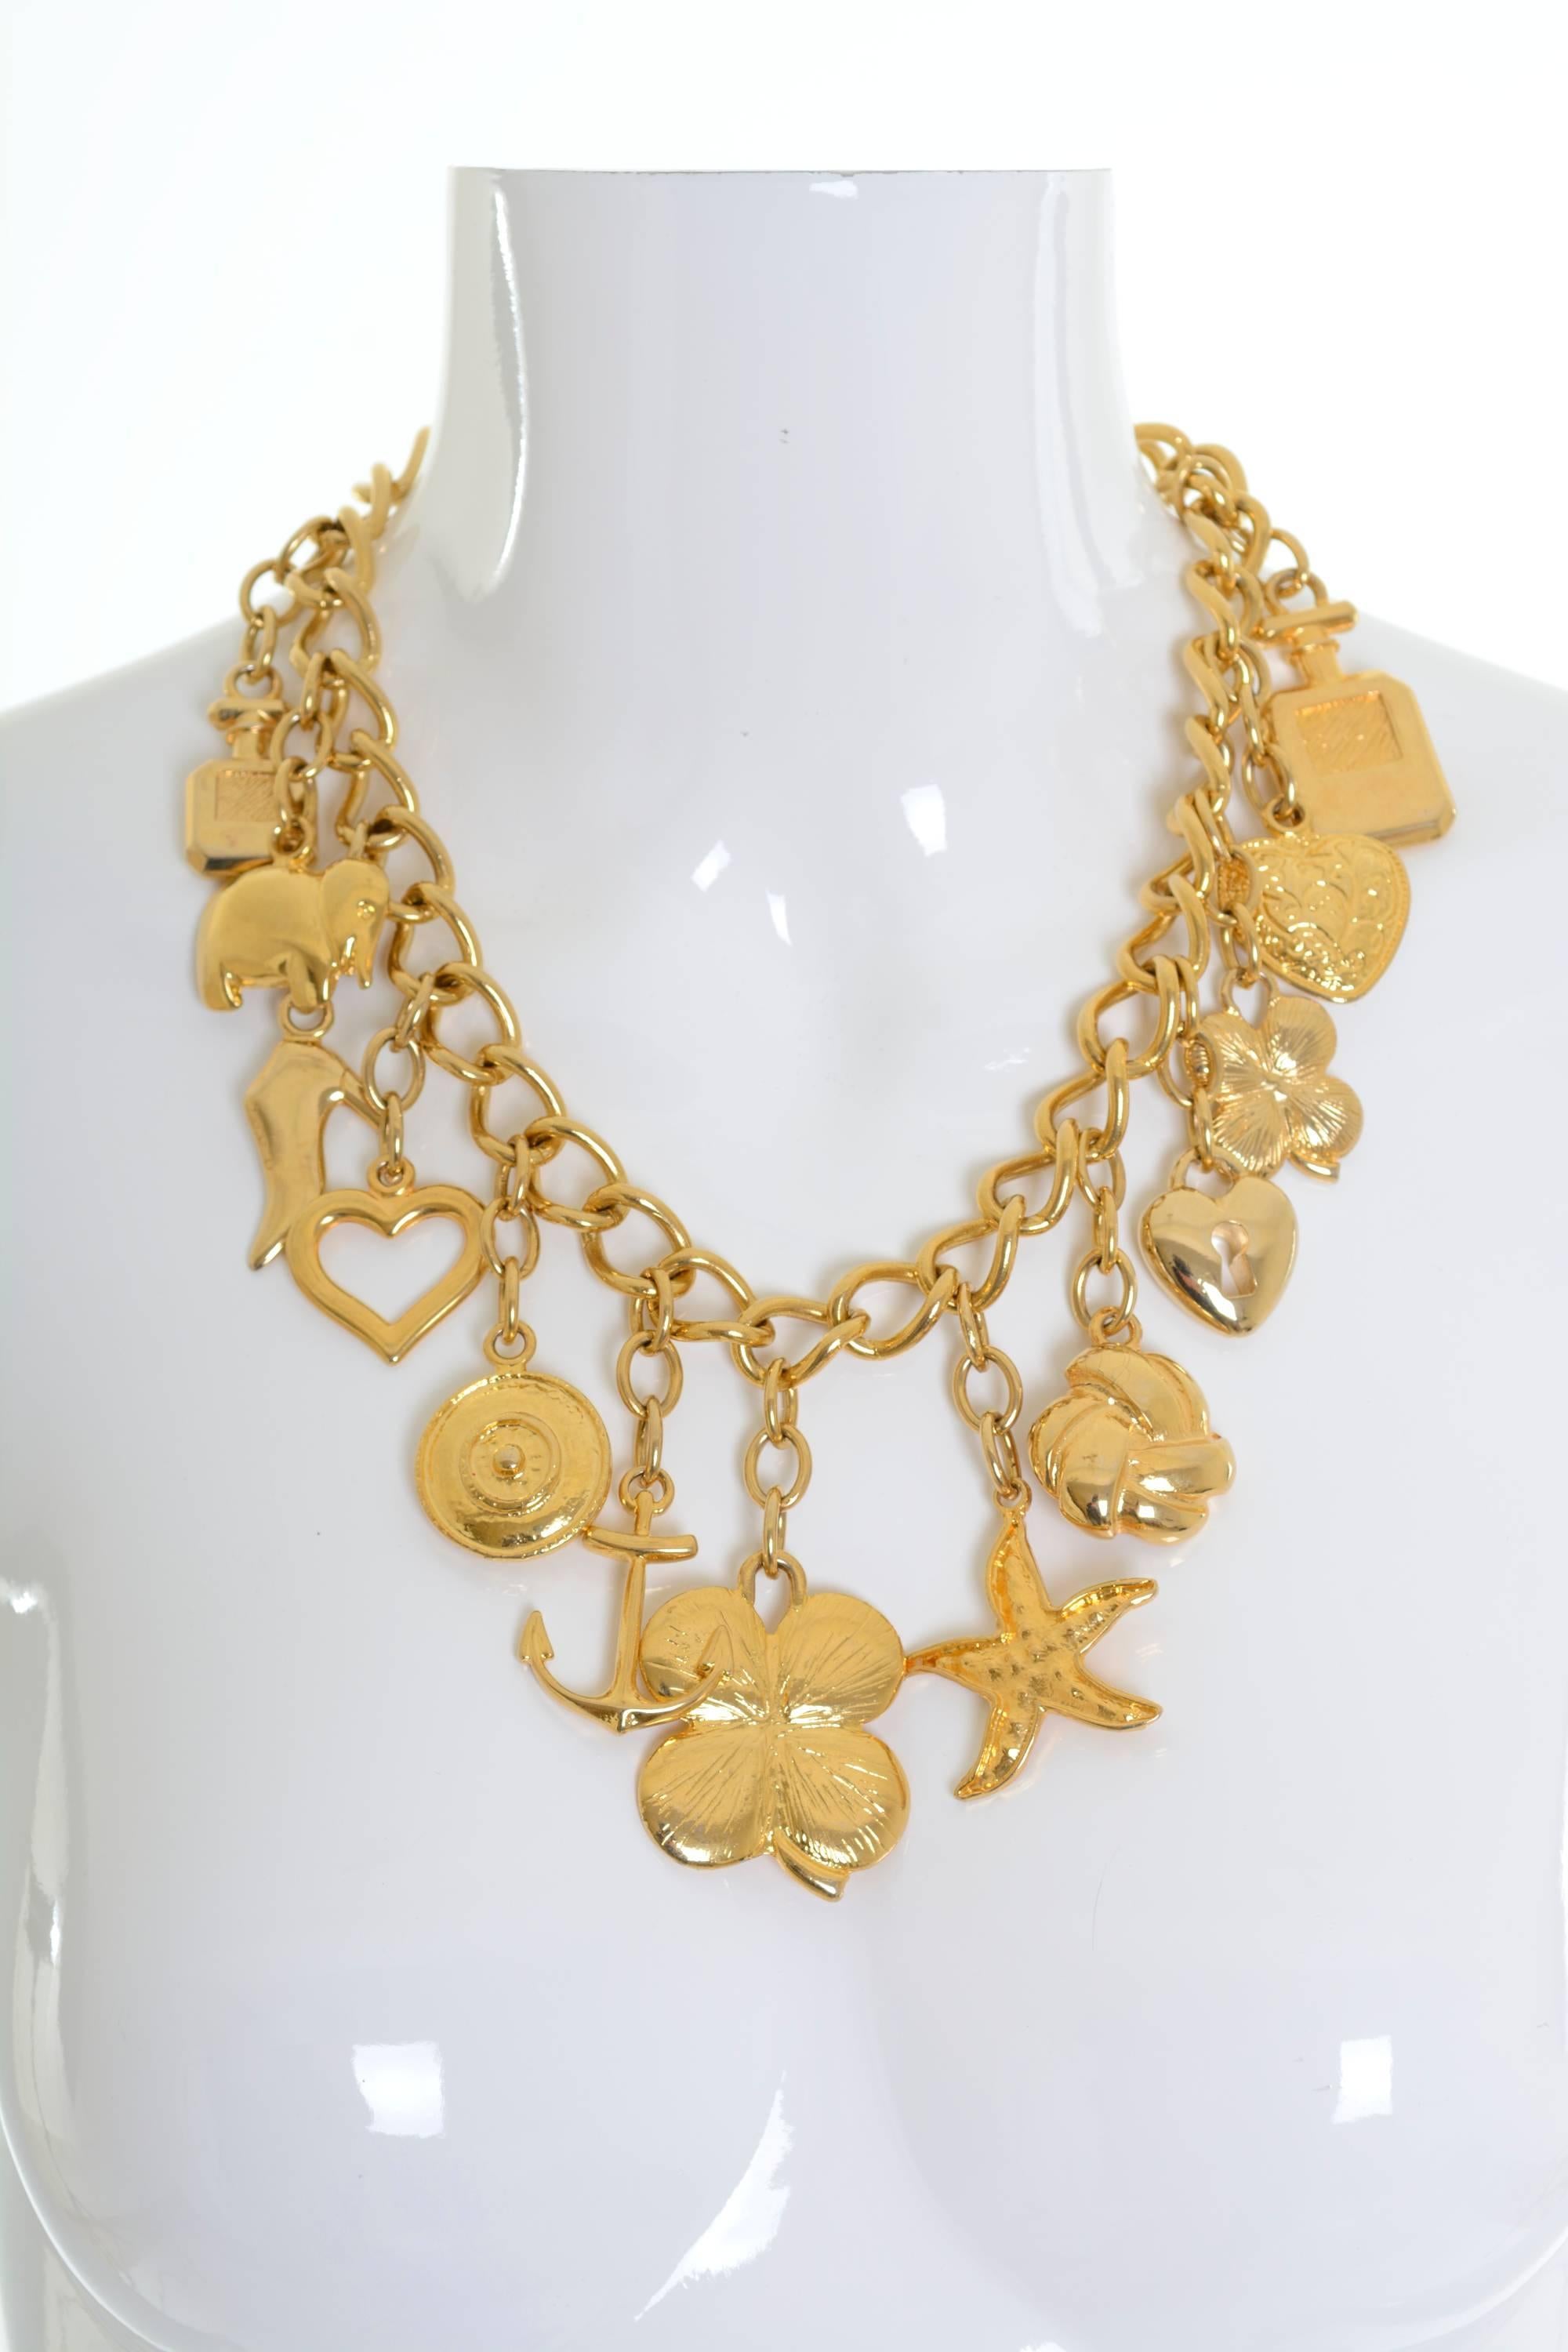 This stunning Ugo Correani large chain necklace has lovely golden metal charms. 

UGO CORREANI (1935 - 1992) was an Italian fashion designer specializing in accessories and jewelry design.
Born in Frascati, at 20 years old Correani moved to Milan to